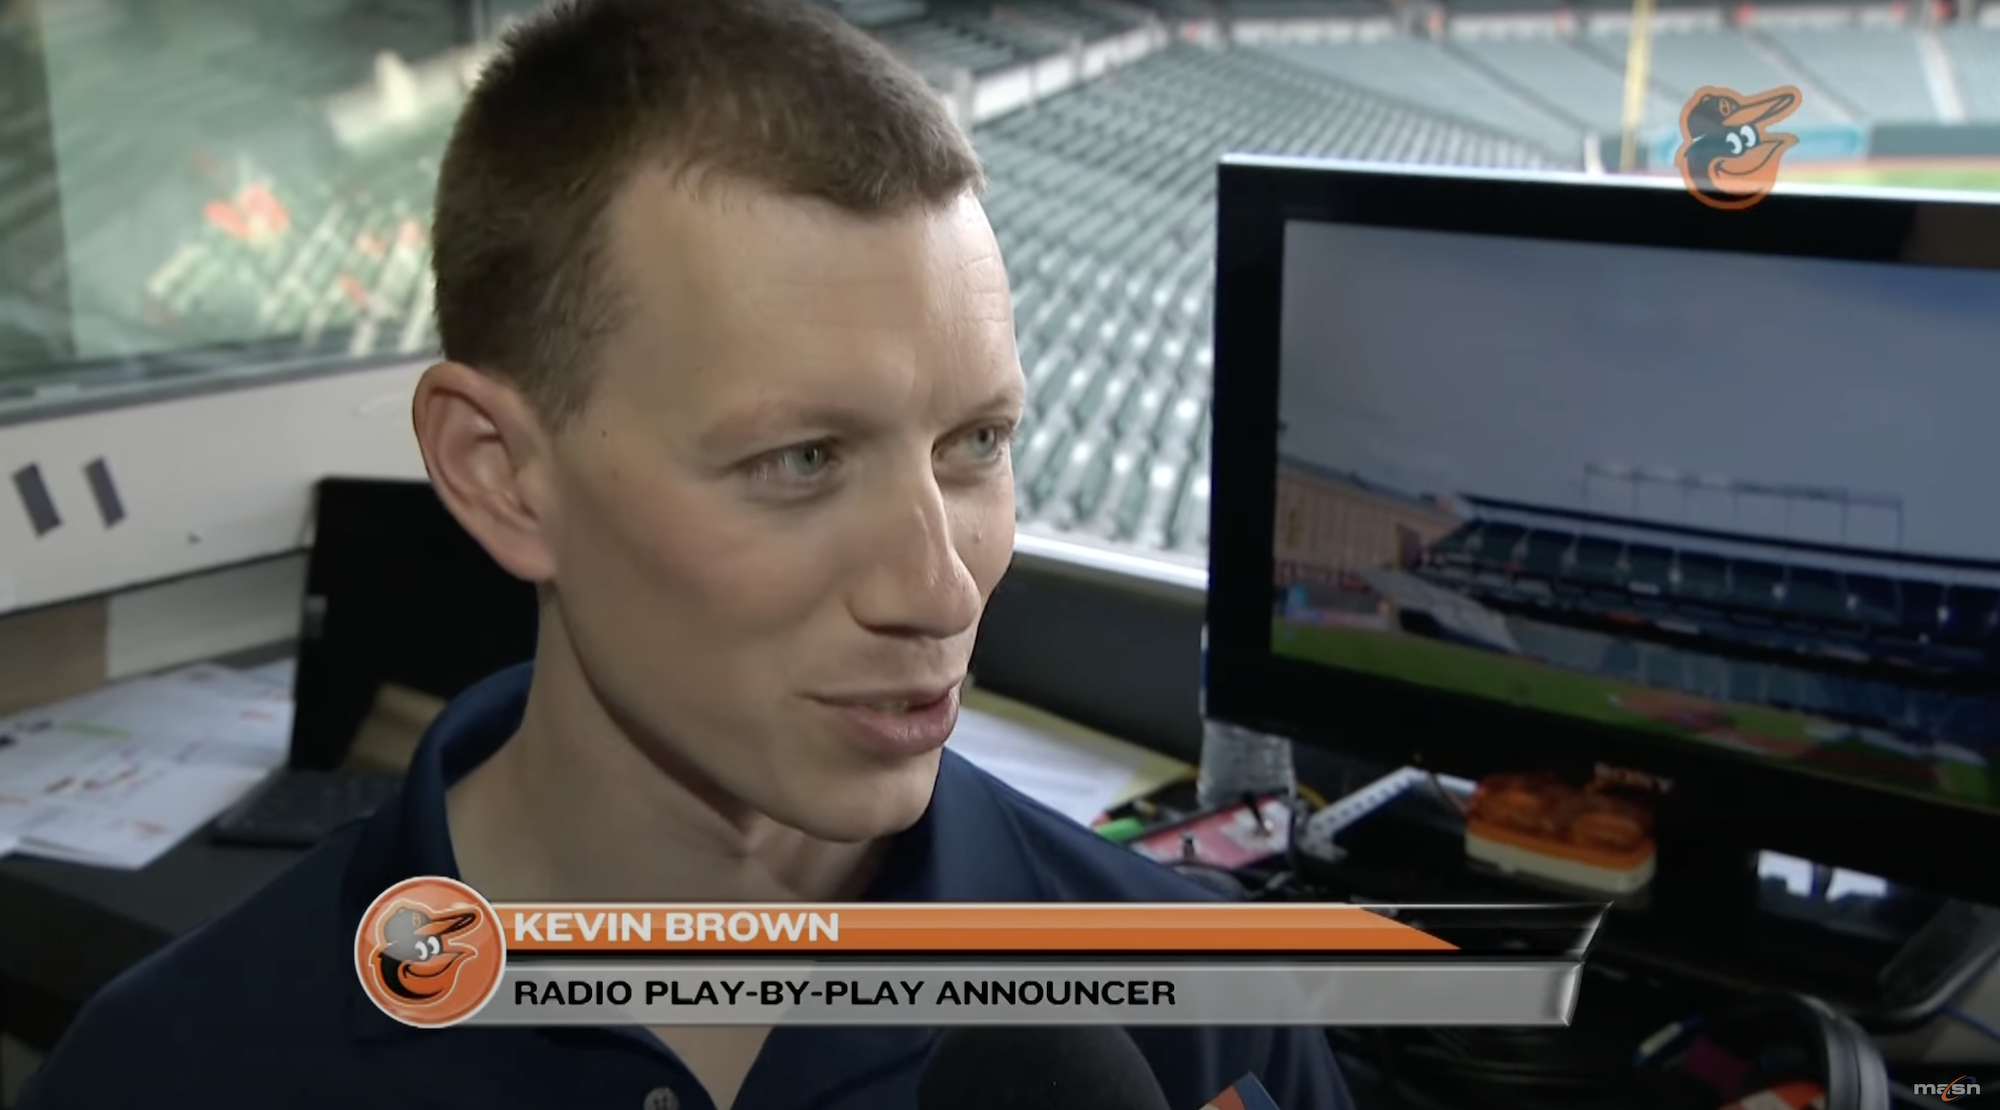 Orioles TV and radio play-by-play announcer Kevin Brown, from a 2019 MASN segment.